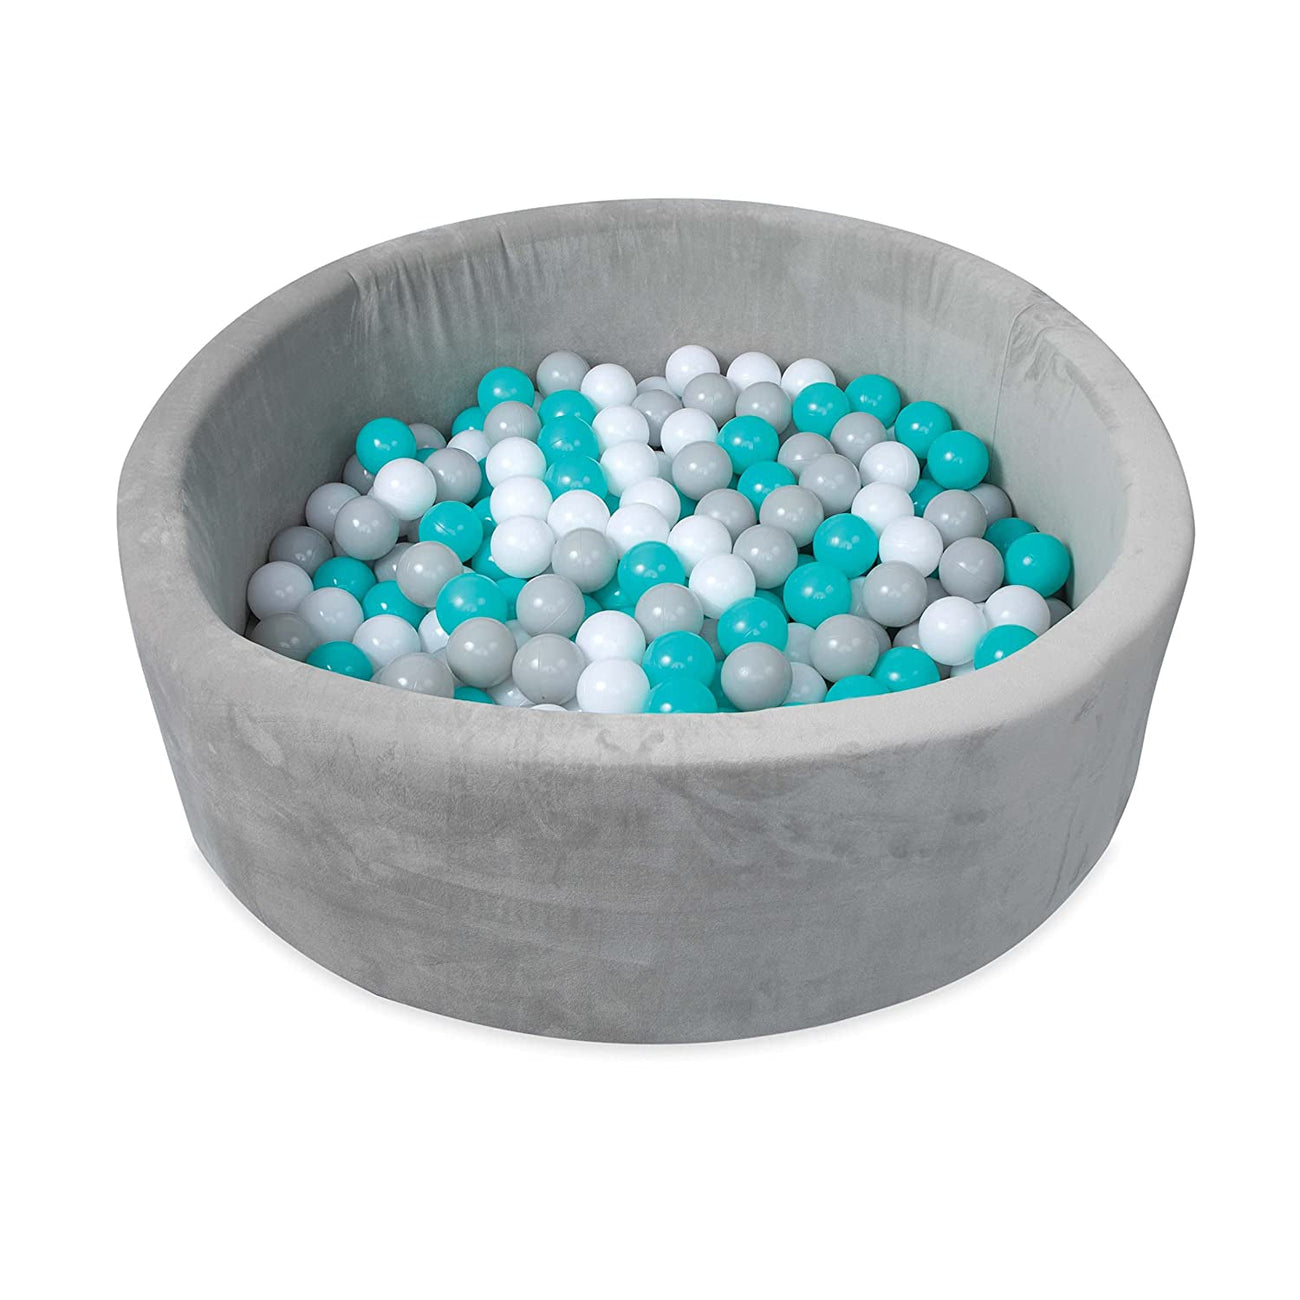 emocionante Sinceridad Conejo Kids' Ball Pit for Home | Toddler Ball Pit with 200 Balls | Nuby US